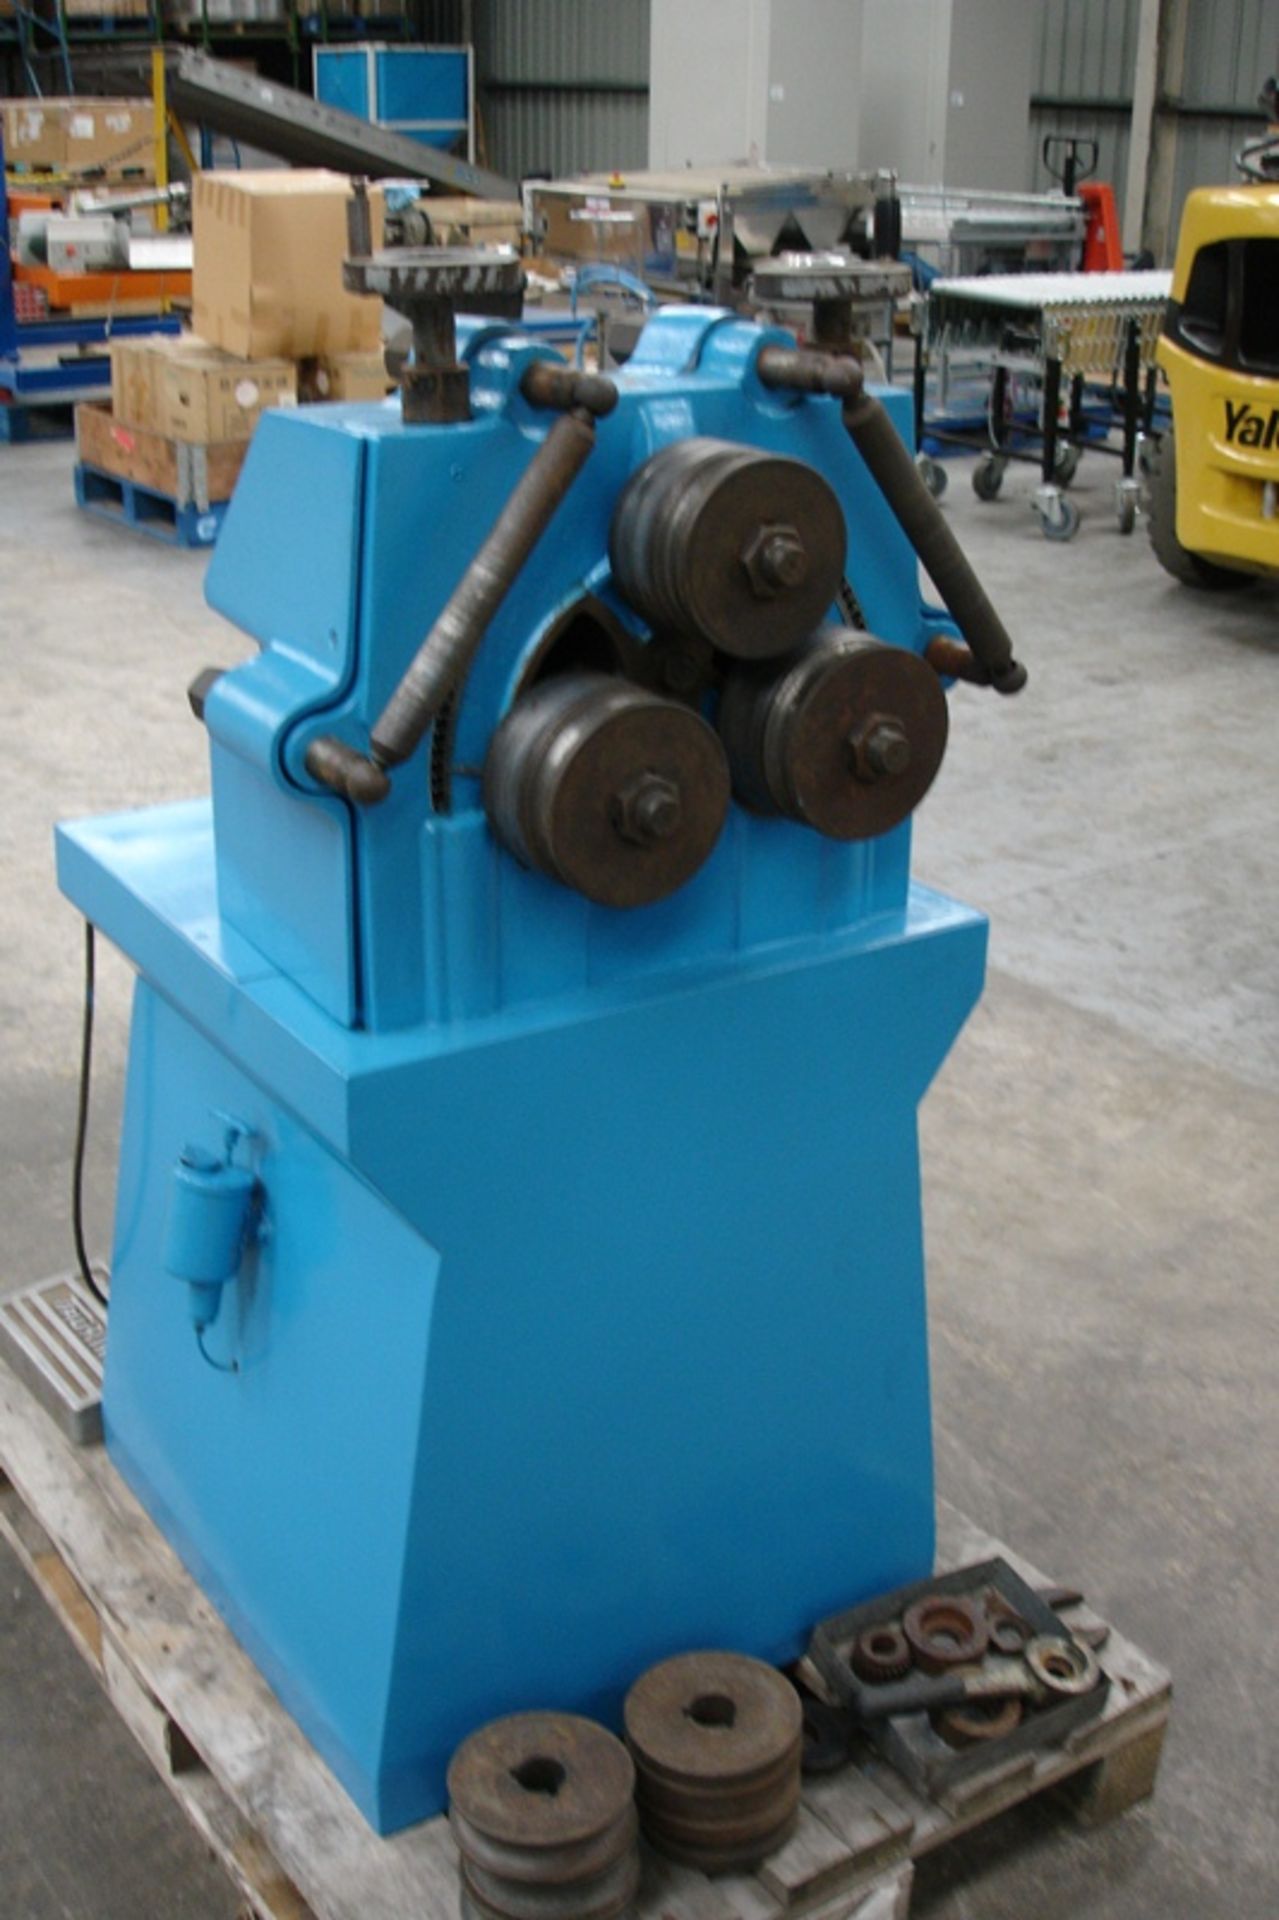 Tauring Sectional/Pipe Pyramid Bending Rollers